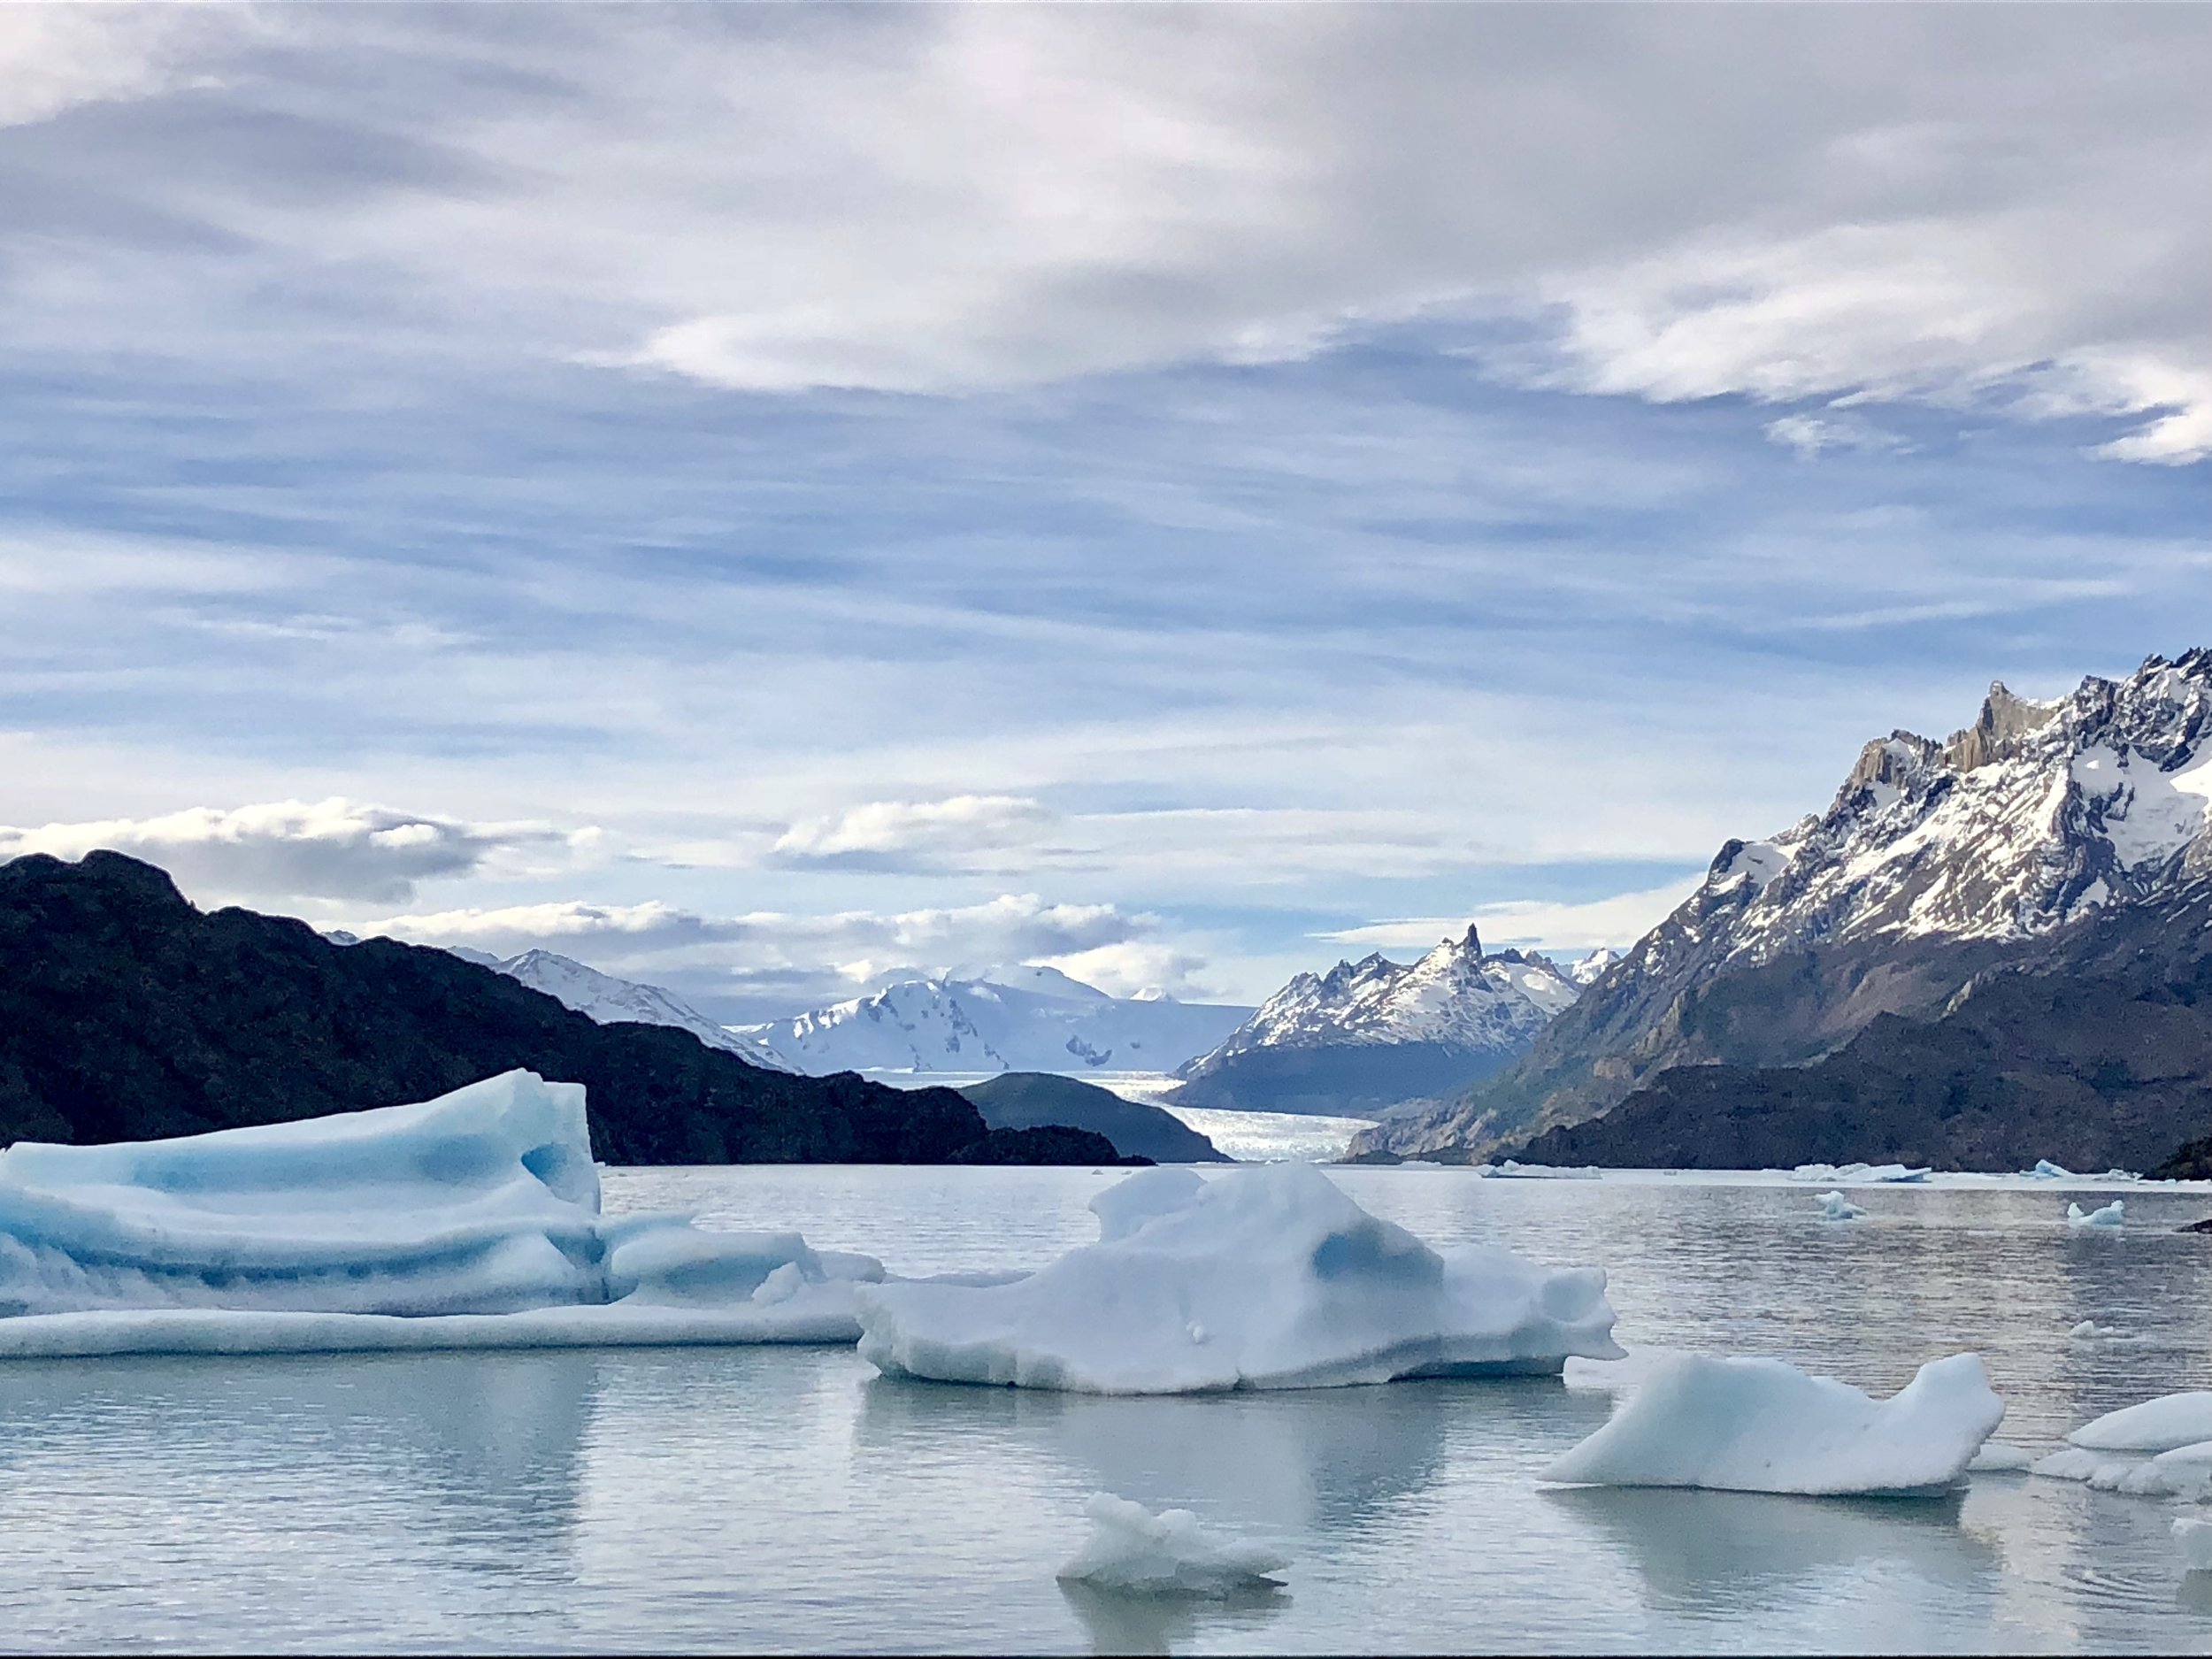 Icebergs in Patagonia